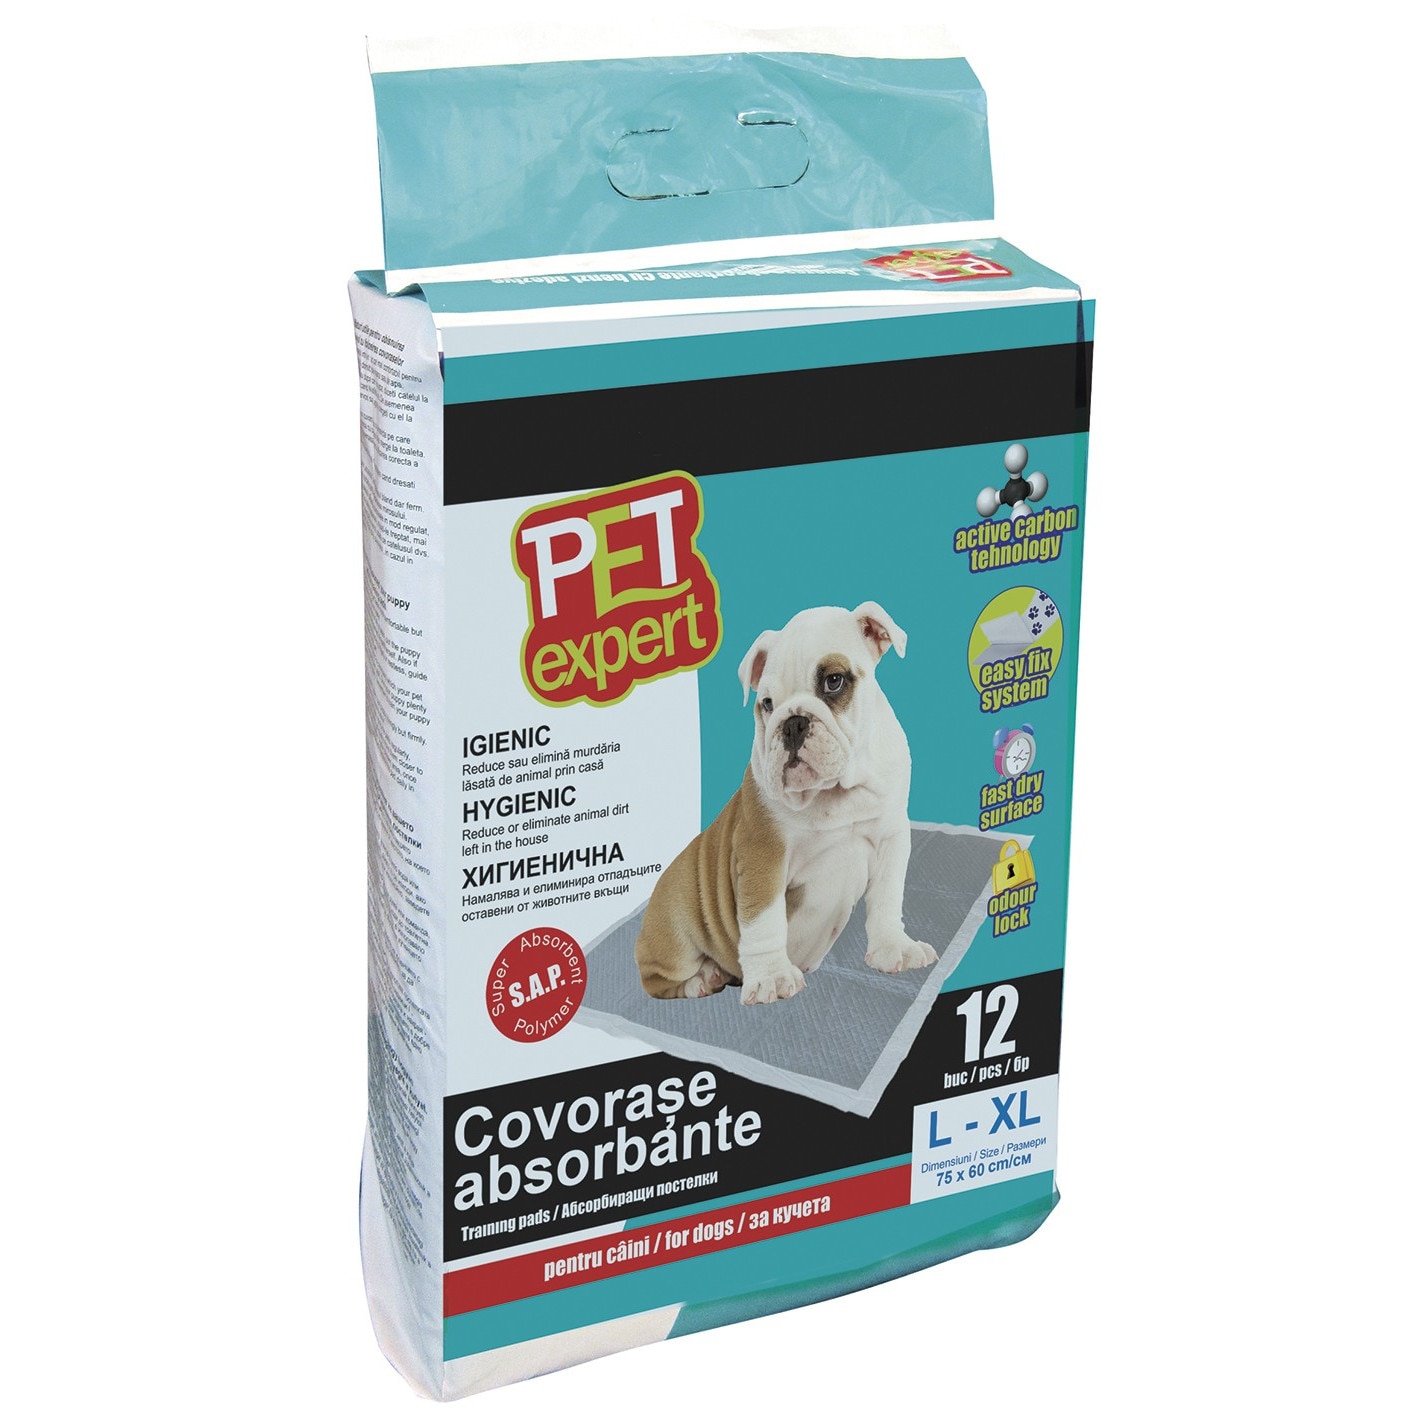 Biggest Can not spin Covorase absorbante pentru caini, Pet Expert Covor Absorbant L Carbon 60 X  75 CM, 12 BUC - eMAG.ro